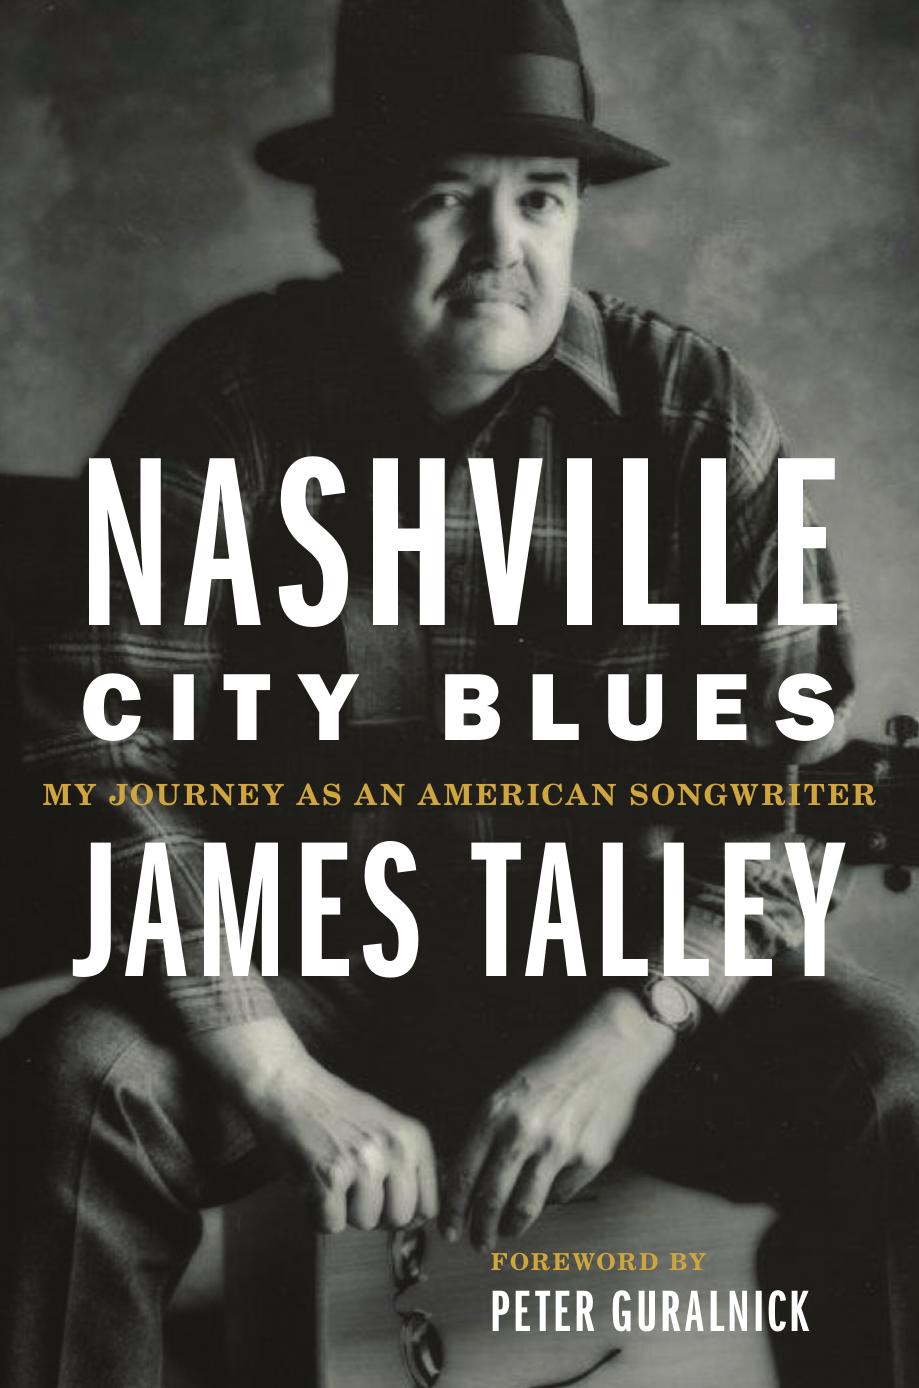 Nashville City Blues: My Journey as an American Songwriter by James Talley